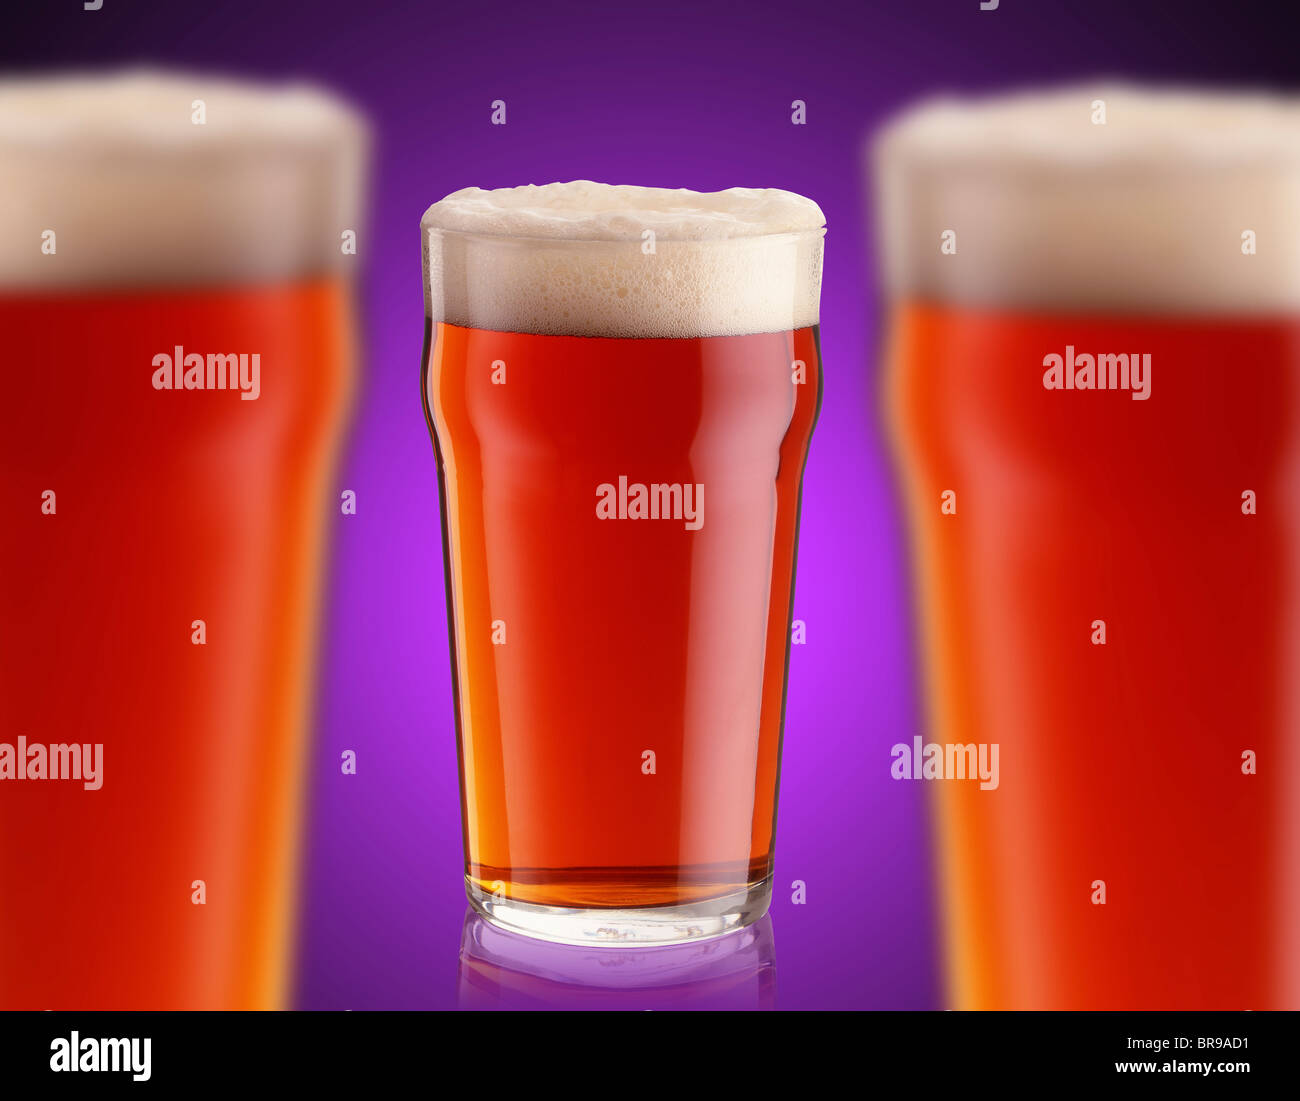 3 pints of bitter ale against a purple background Stock Photo